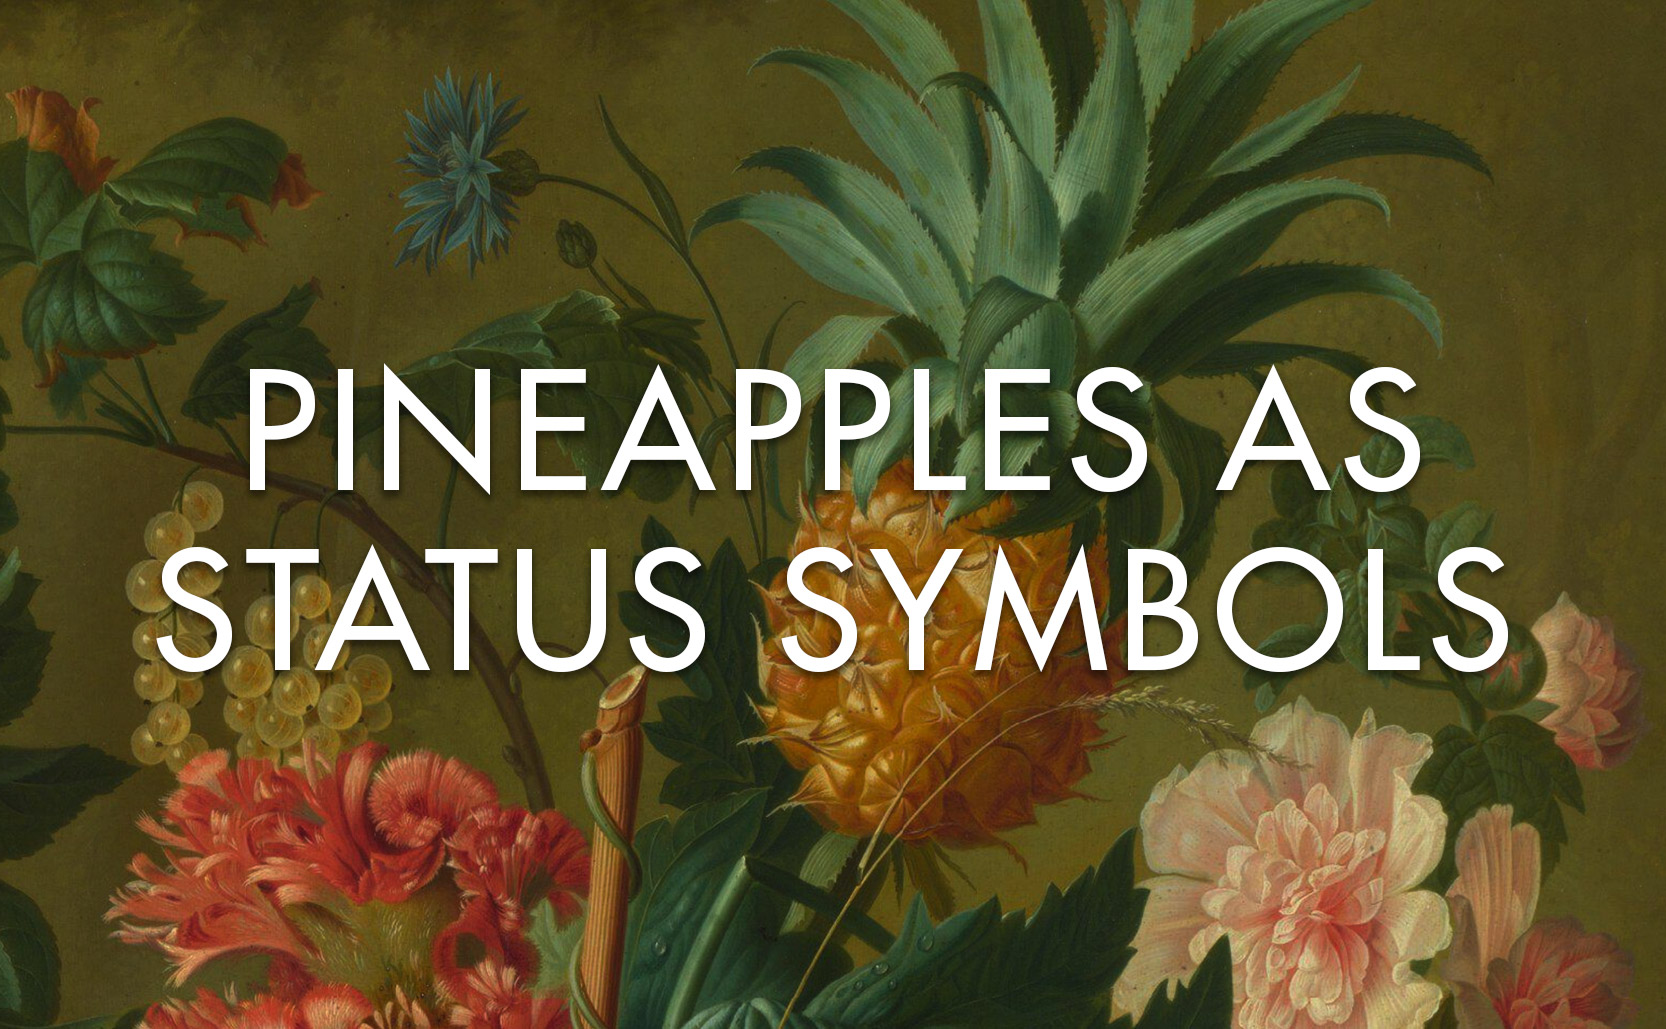 You are currently viewing Pineapples as Status Symbols